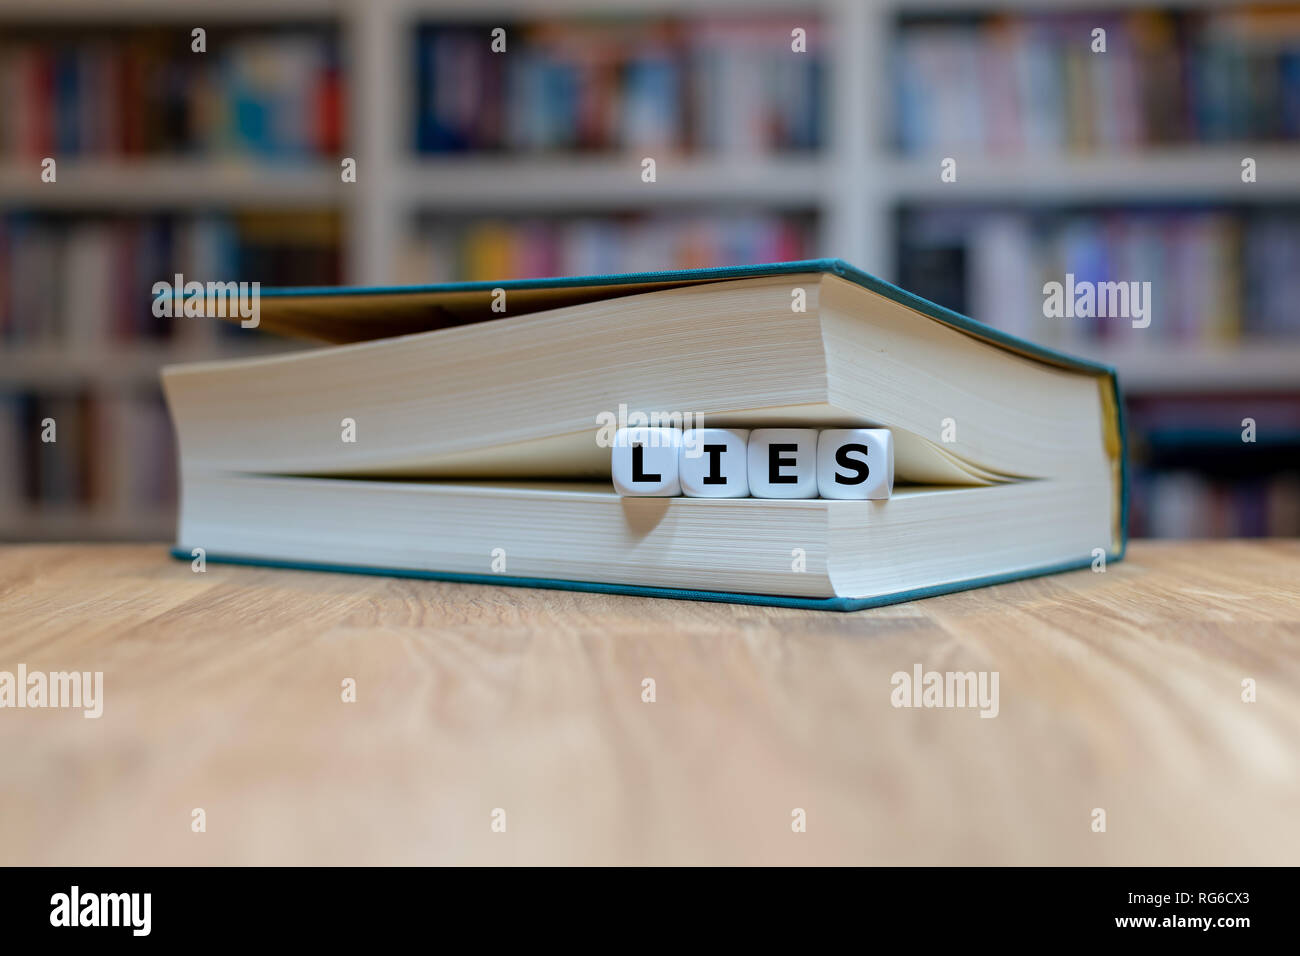 Dice in a book form the German word 'lies' ('read' in English). Book is lying on a wooden desk in front of a bookshelf. Stock Photo